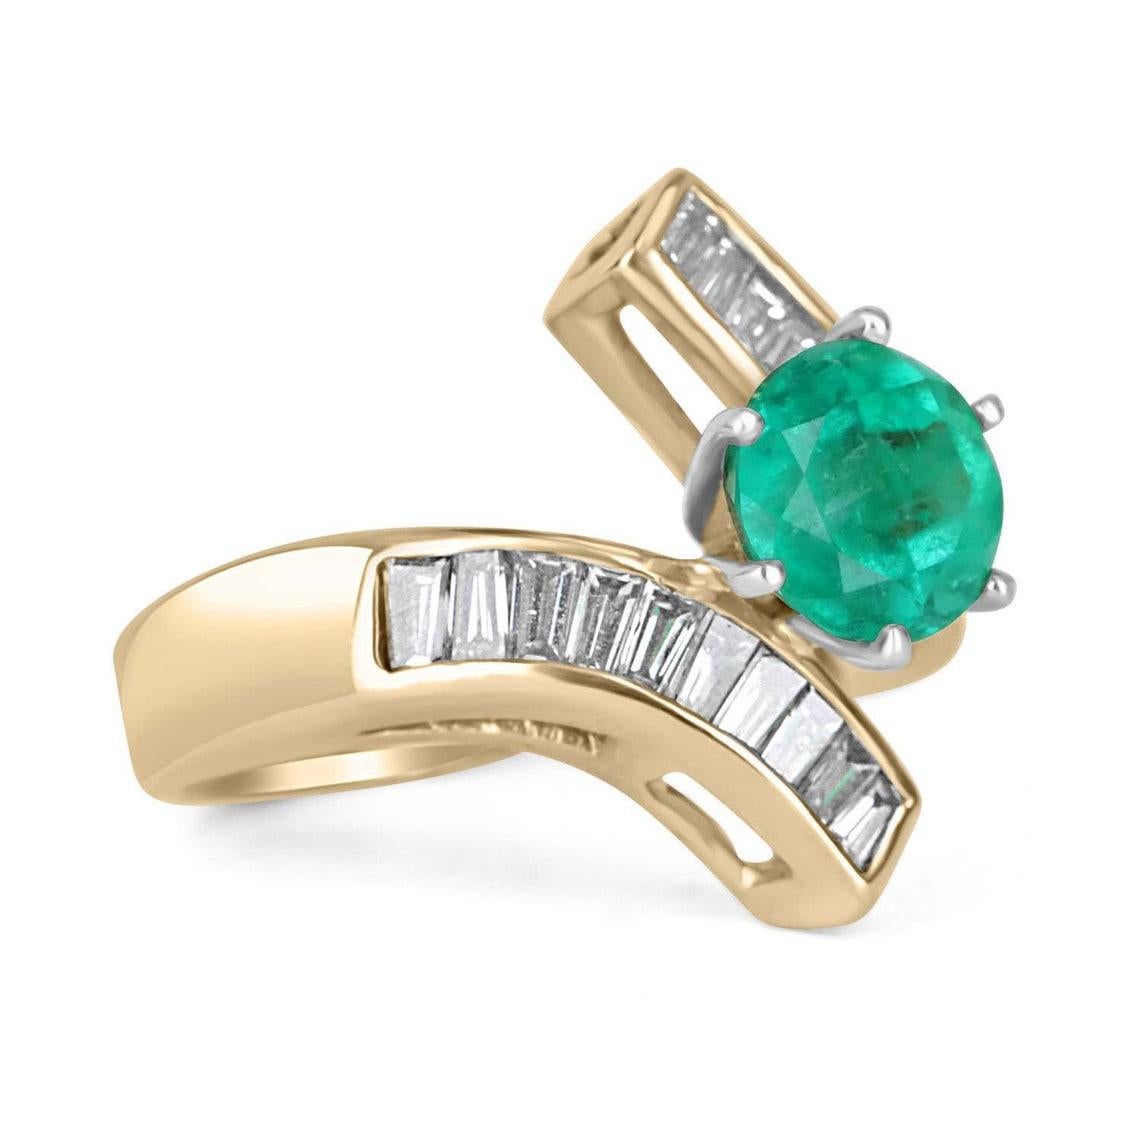 Displayed is a spectacular round Colombian emerald and diamond baguette cocktail ring 14K. Set in 14k yellow gold, the sublime emerald weigh a perfect 1.50-carats and is set alongside brilliant white baguette diamonds in an elegant bypass channel